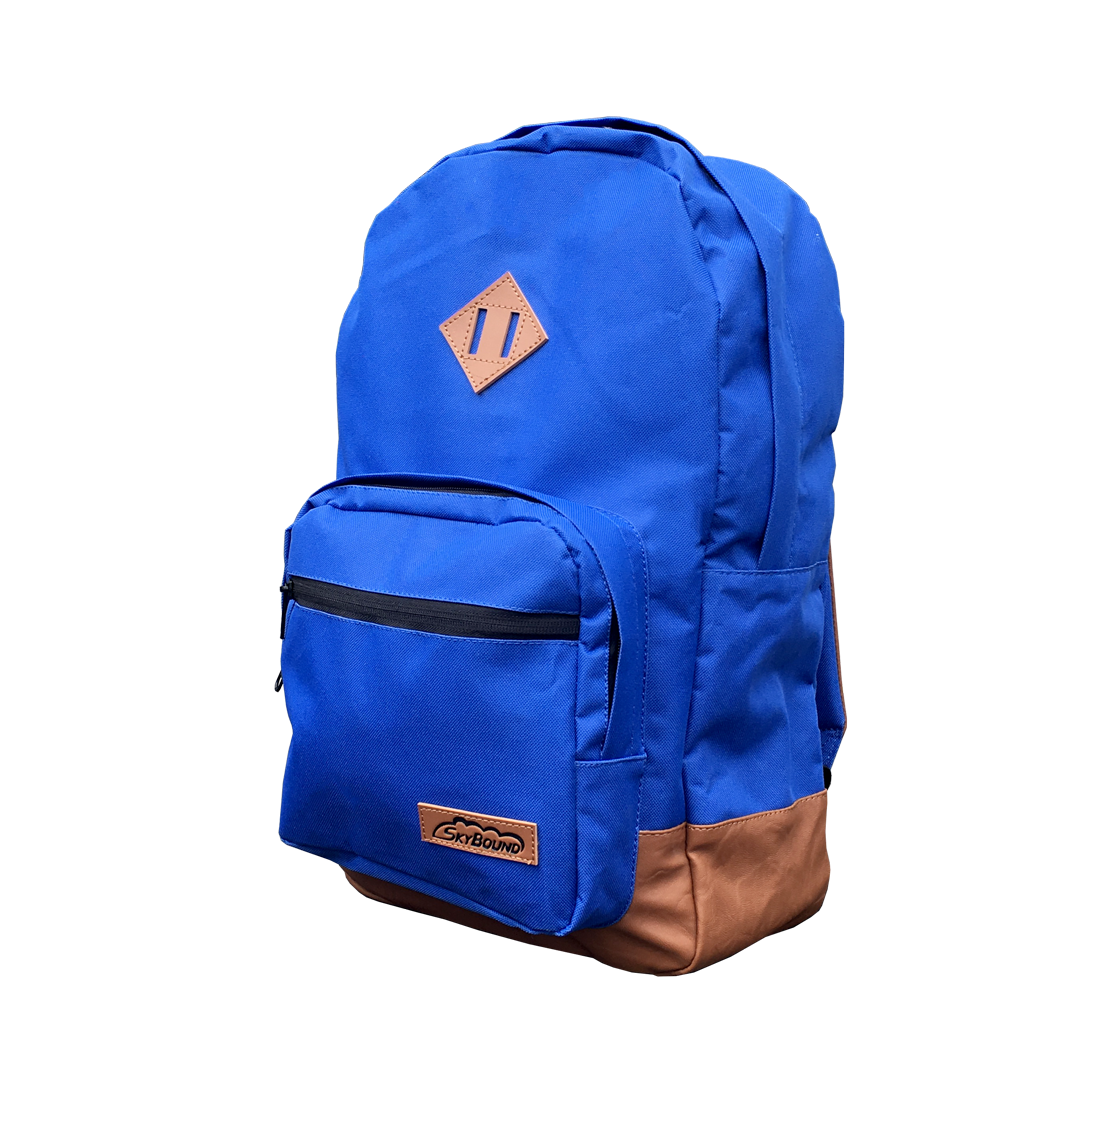 Backpack PNG HD and HQ Image pngteam.com